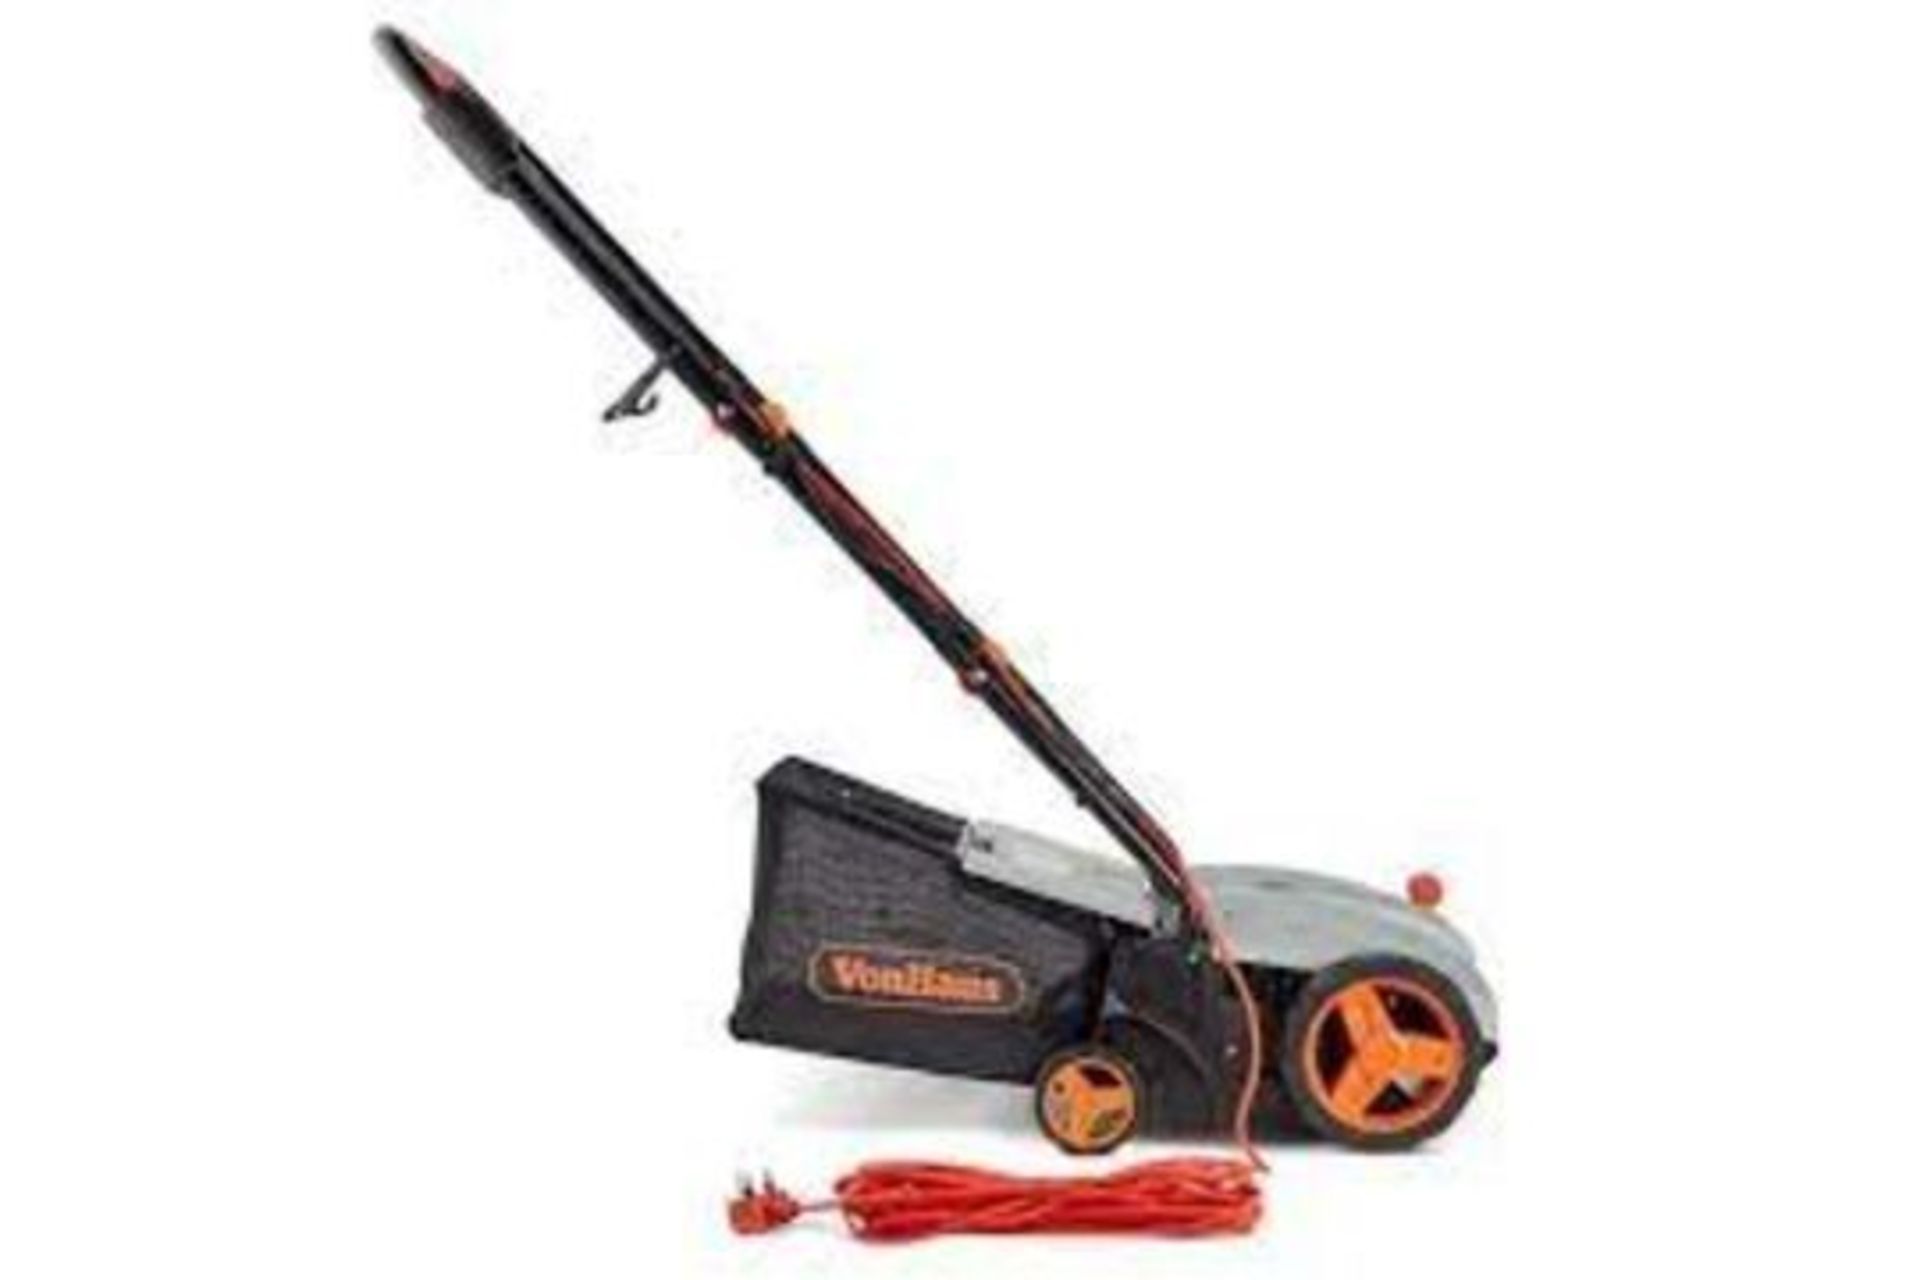 BRAND NEW 1300W LAWN MOSS RAKE This 1300W electric rake is the easy way to clear your lawn of